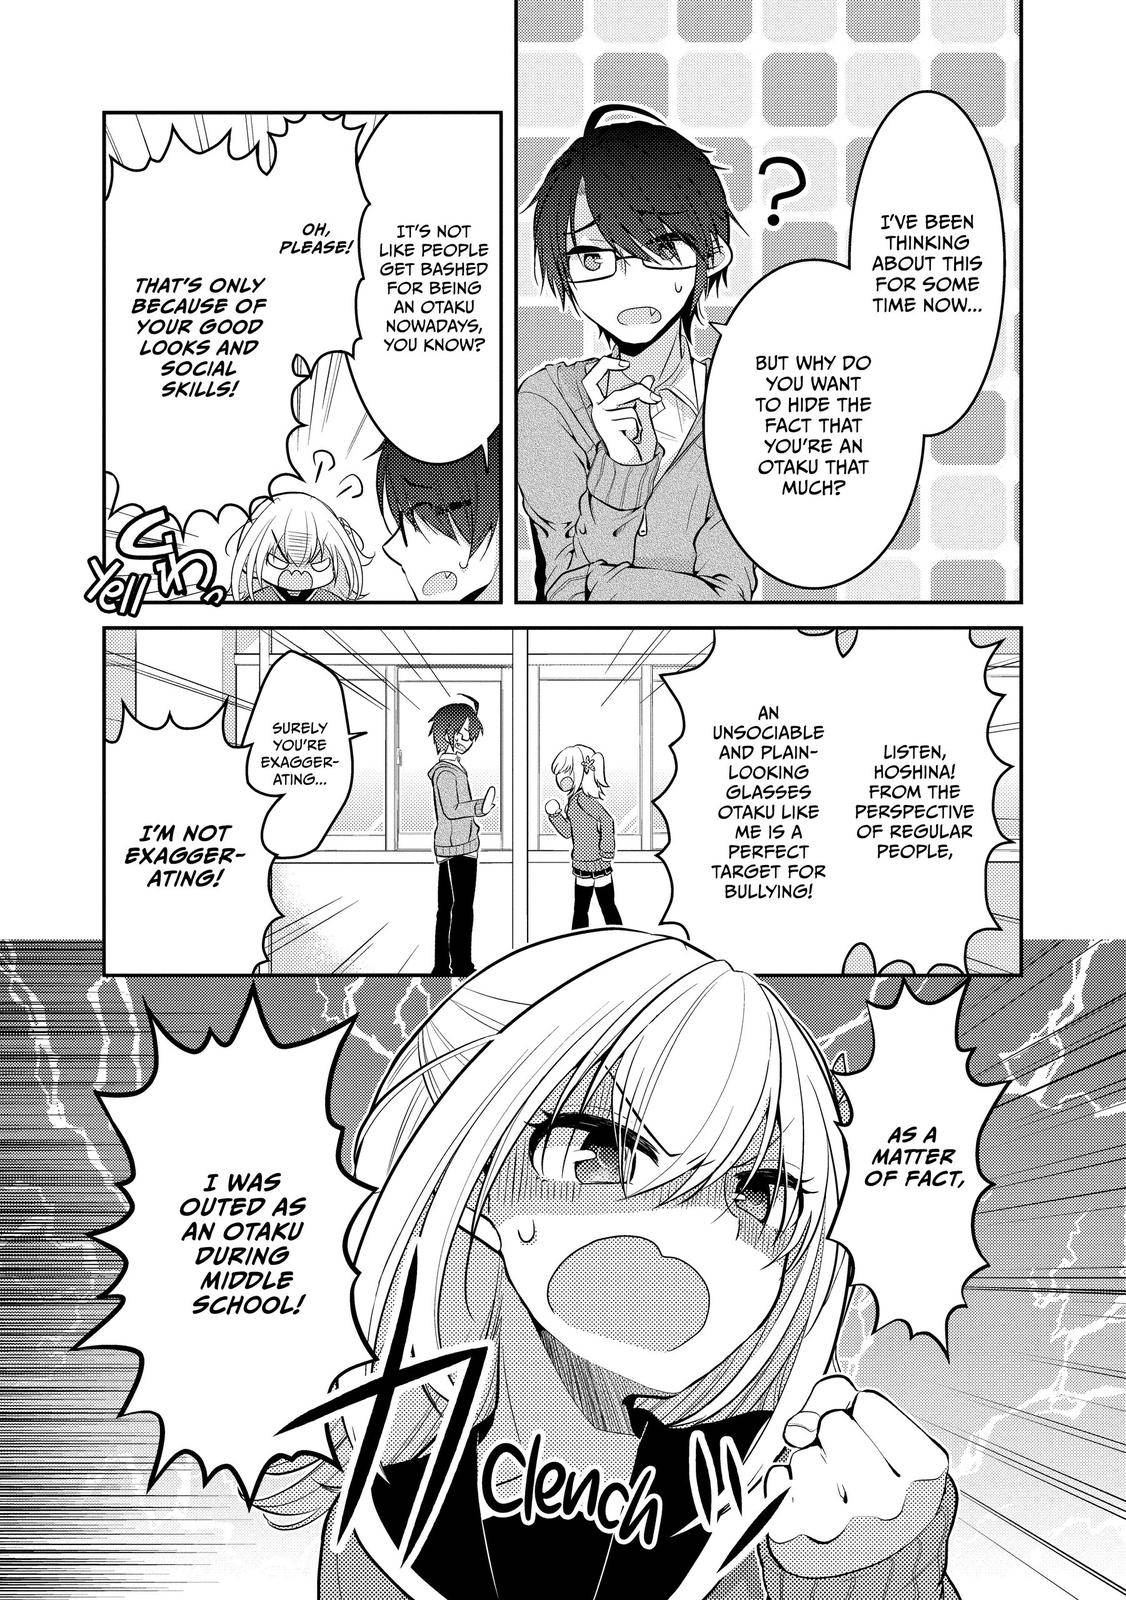 I Love Yuri and I Got Bodyswapped with a Fujoshi! - chapter 5 - #5